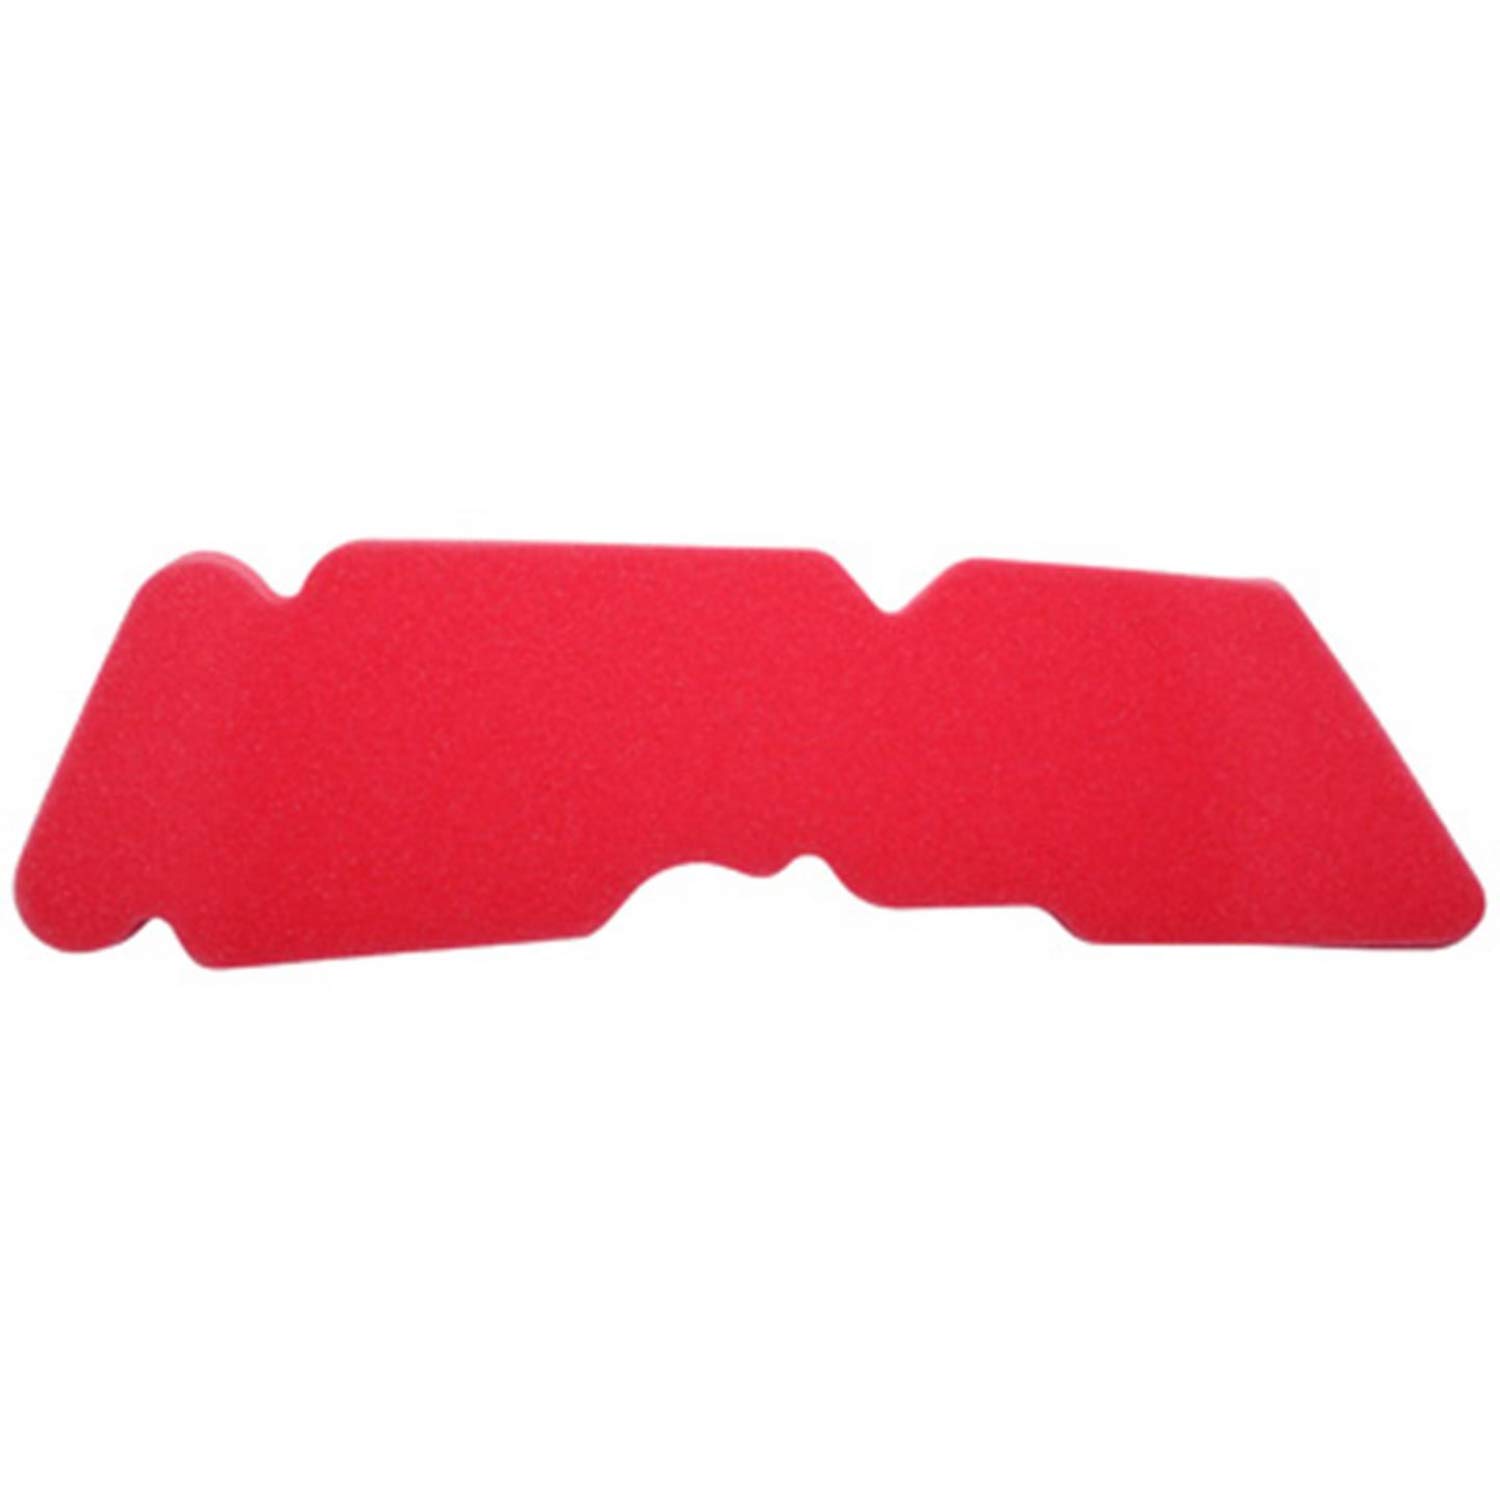 ARTEIN Mousse FILTRE A AIR Scoot Adaptable Piaggio 50 Zip 2T 2000>, NRG 2001>, Typhoon 2001>, Liberty, Fly, LX 2T-GILERA 50 Stalker 2005>, Runner 2002> (Rouge) von ARTEIN